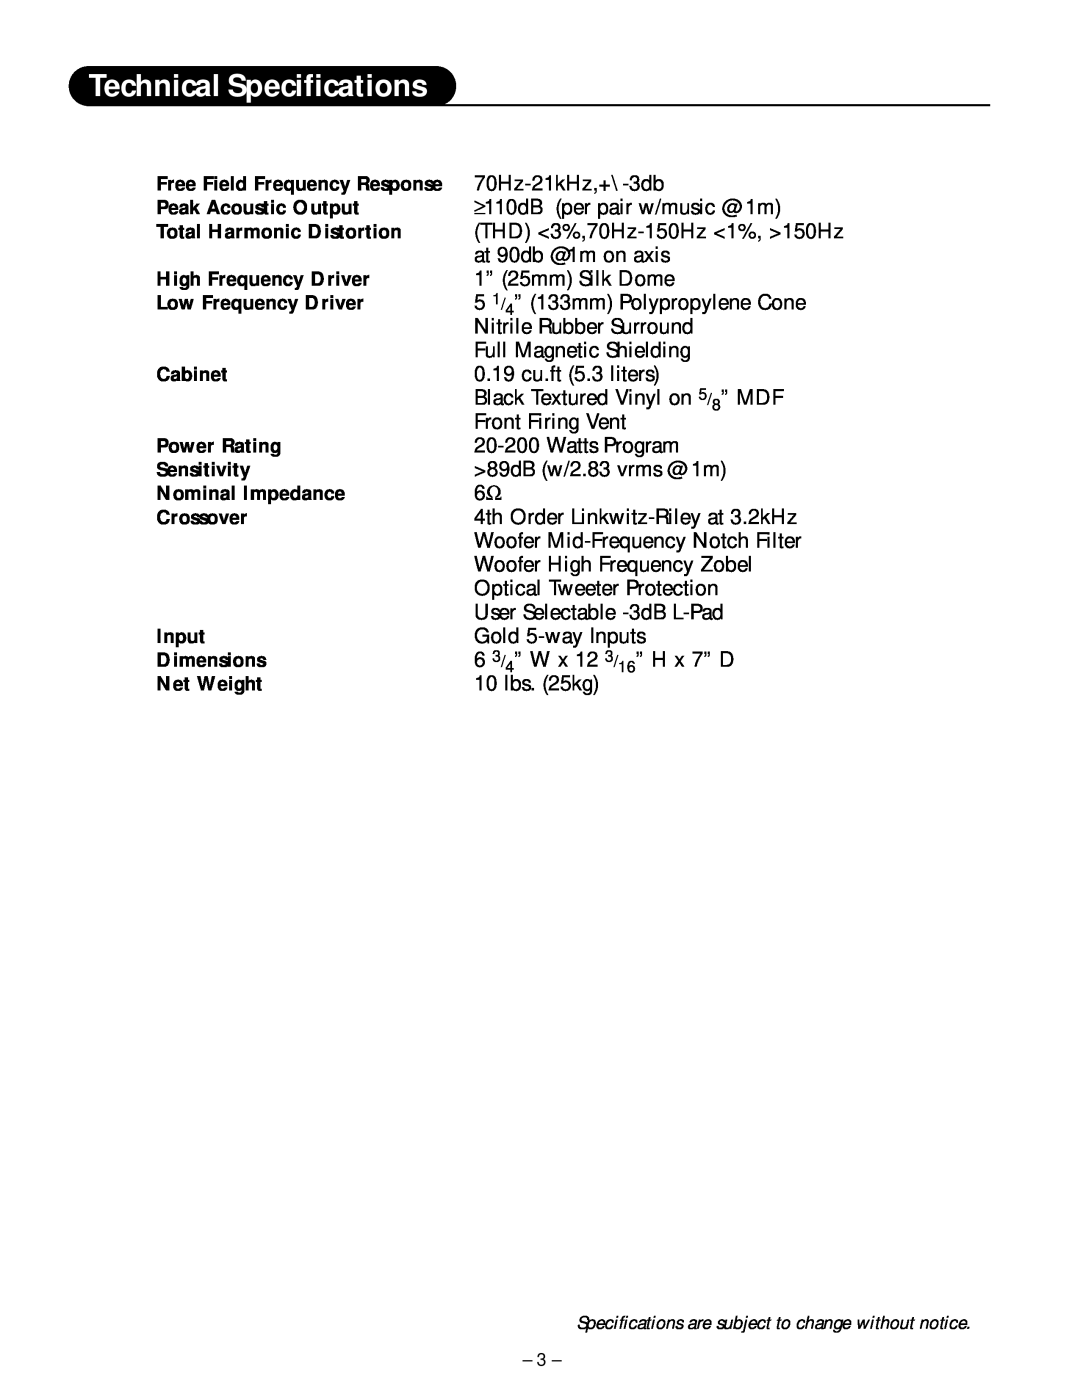 Hafler M5 manual Technical Specifications 